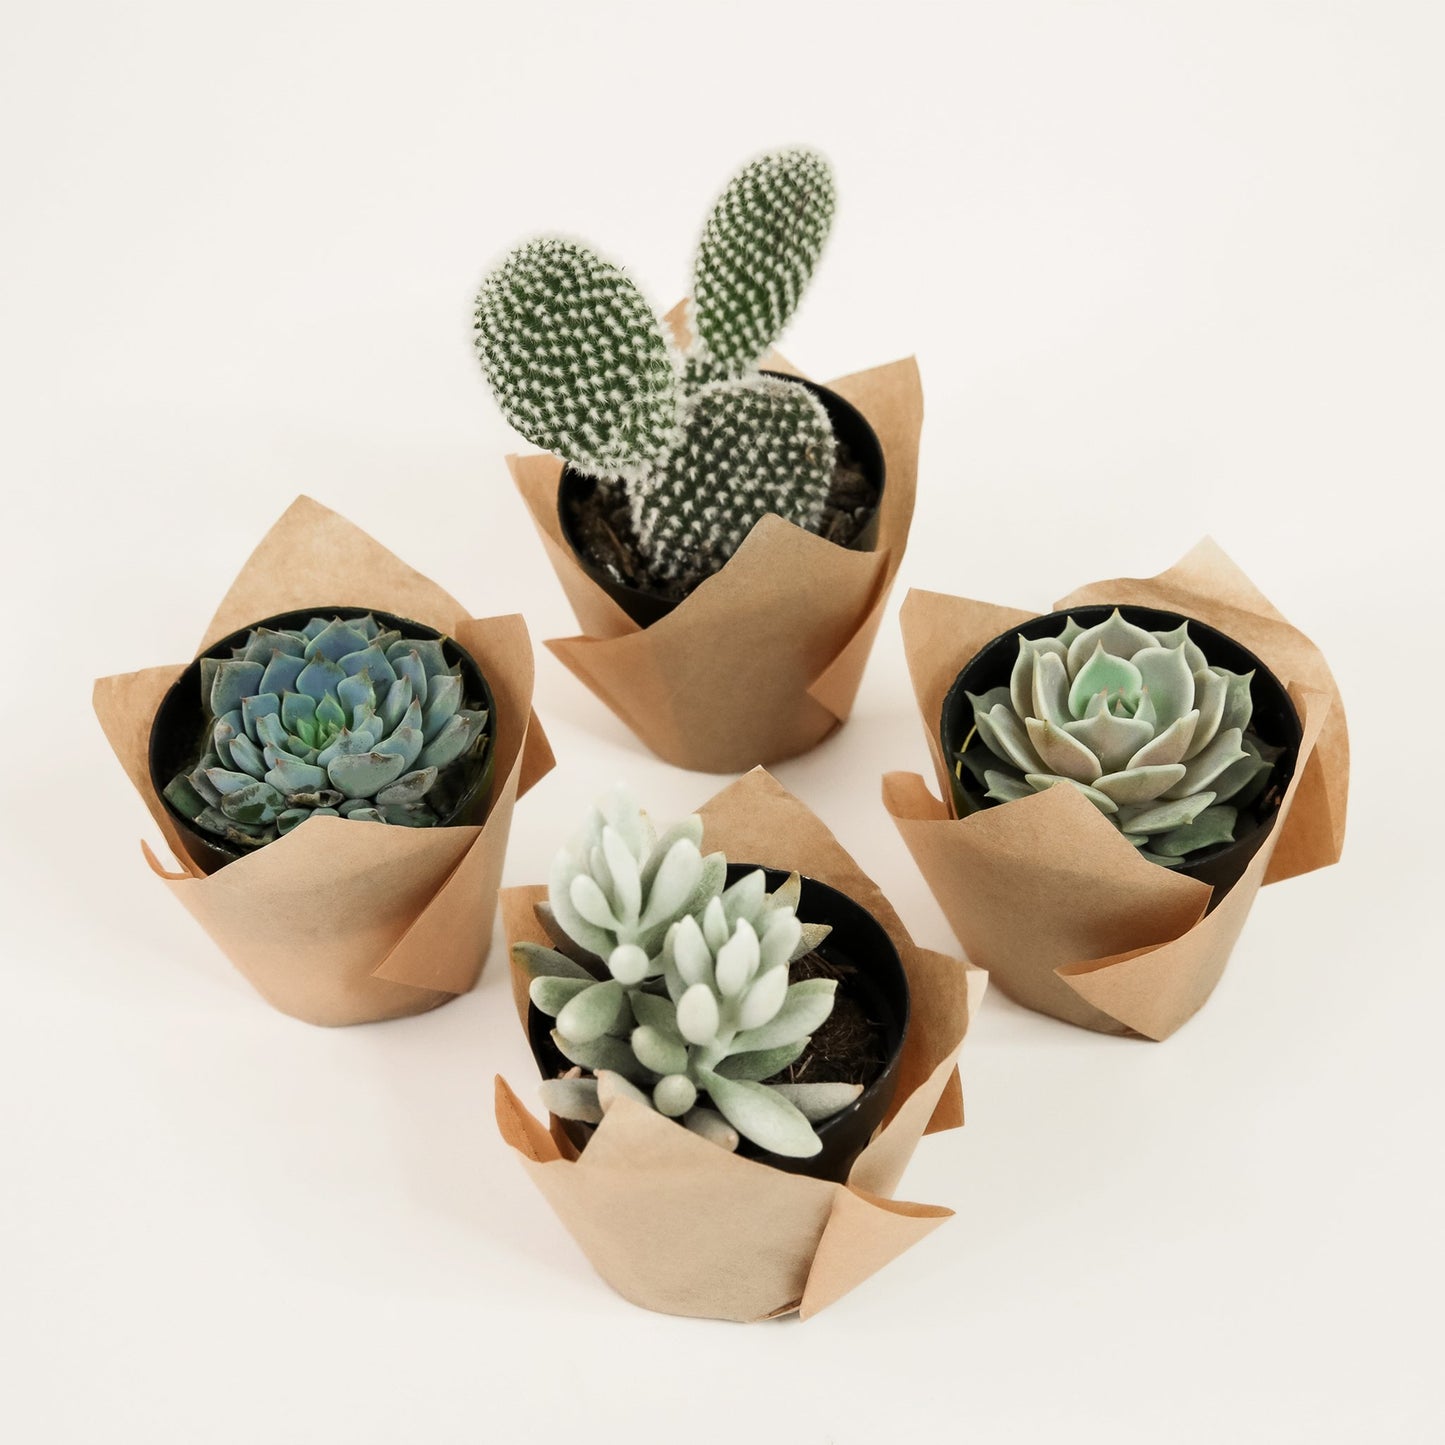 Four individual, 2 inch succulents of various shapes and sizes picked for the small winter kit. Each succulent container is wrapped in brown craft paper.